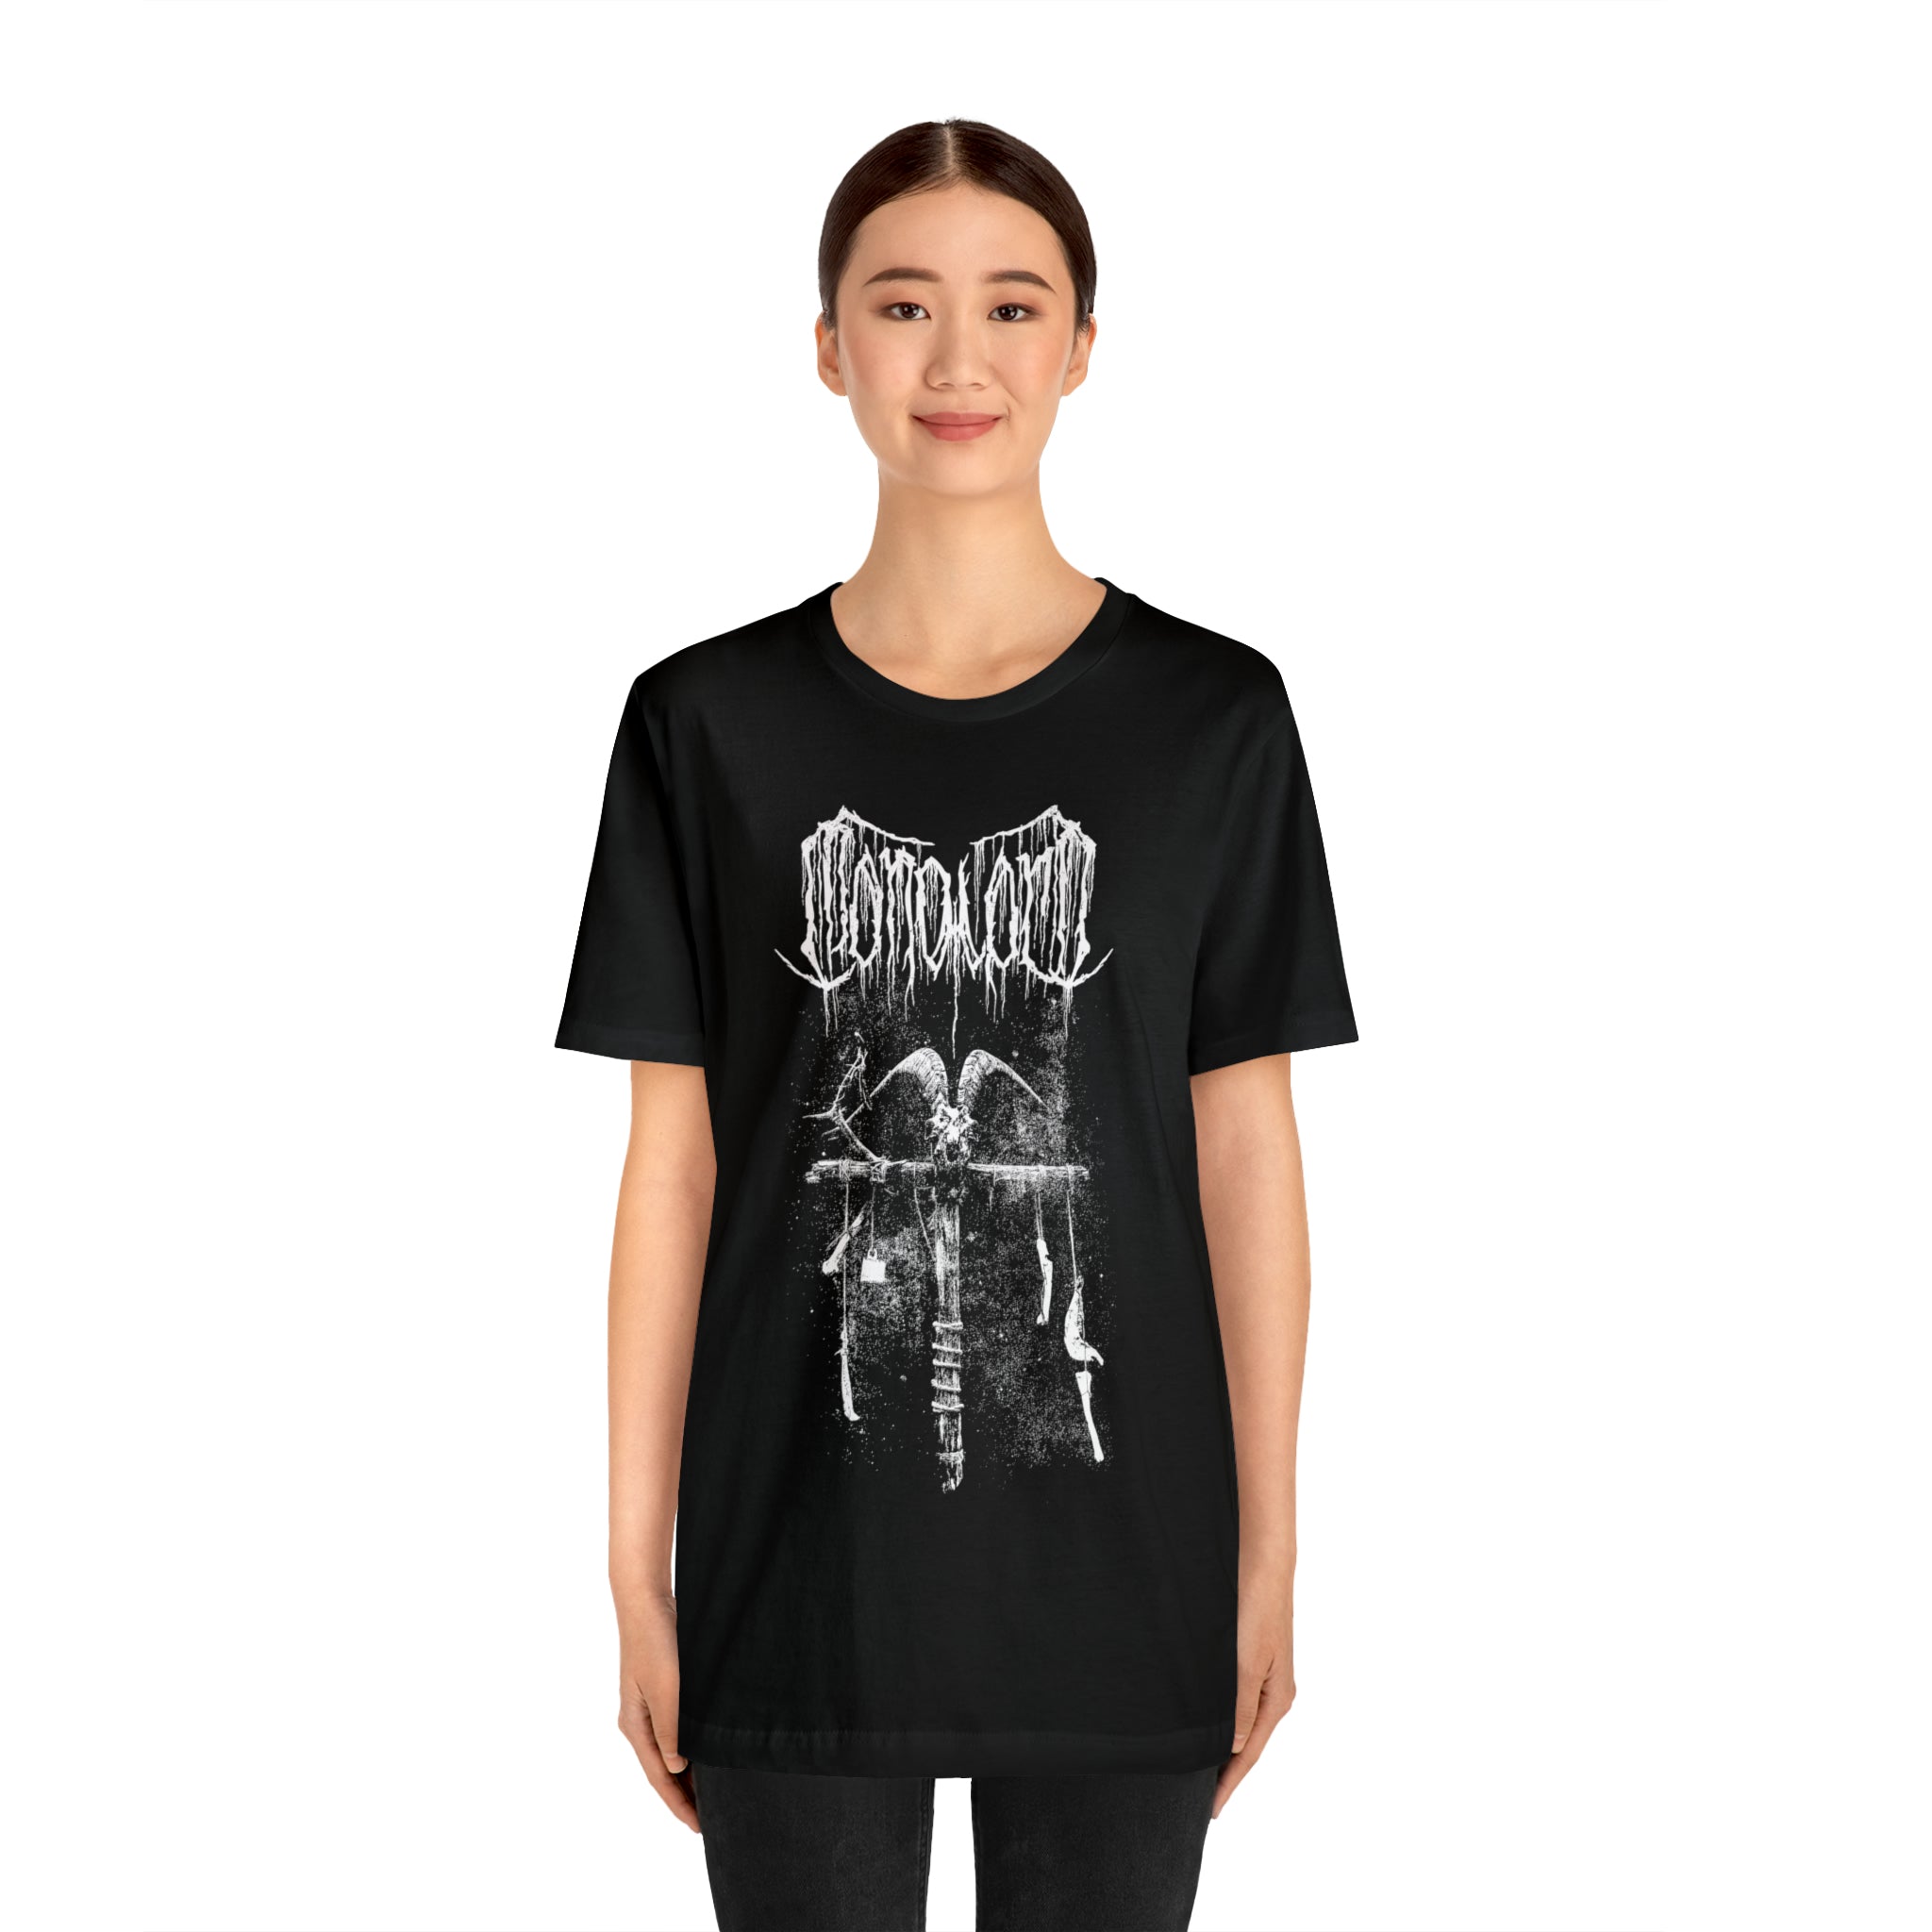 Black Liqvid Ritual - Unisex Jersey Short Sleeve Tee - SHIPS FROM THE US